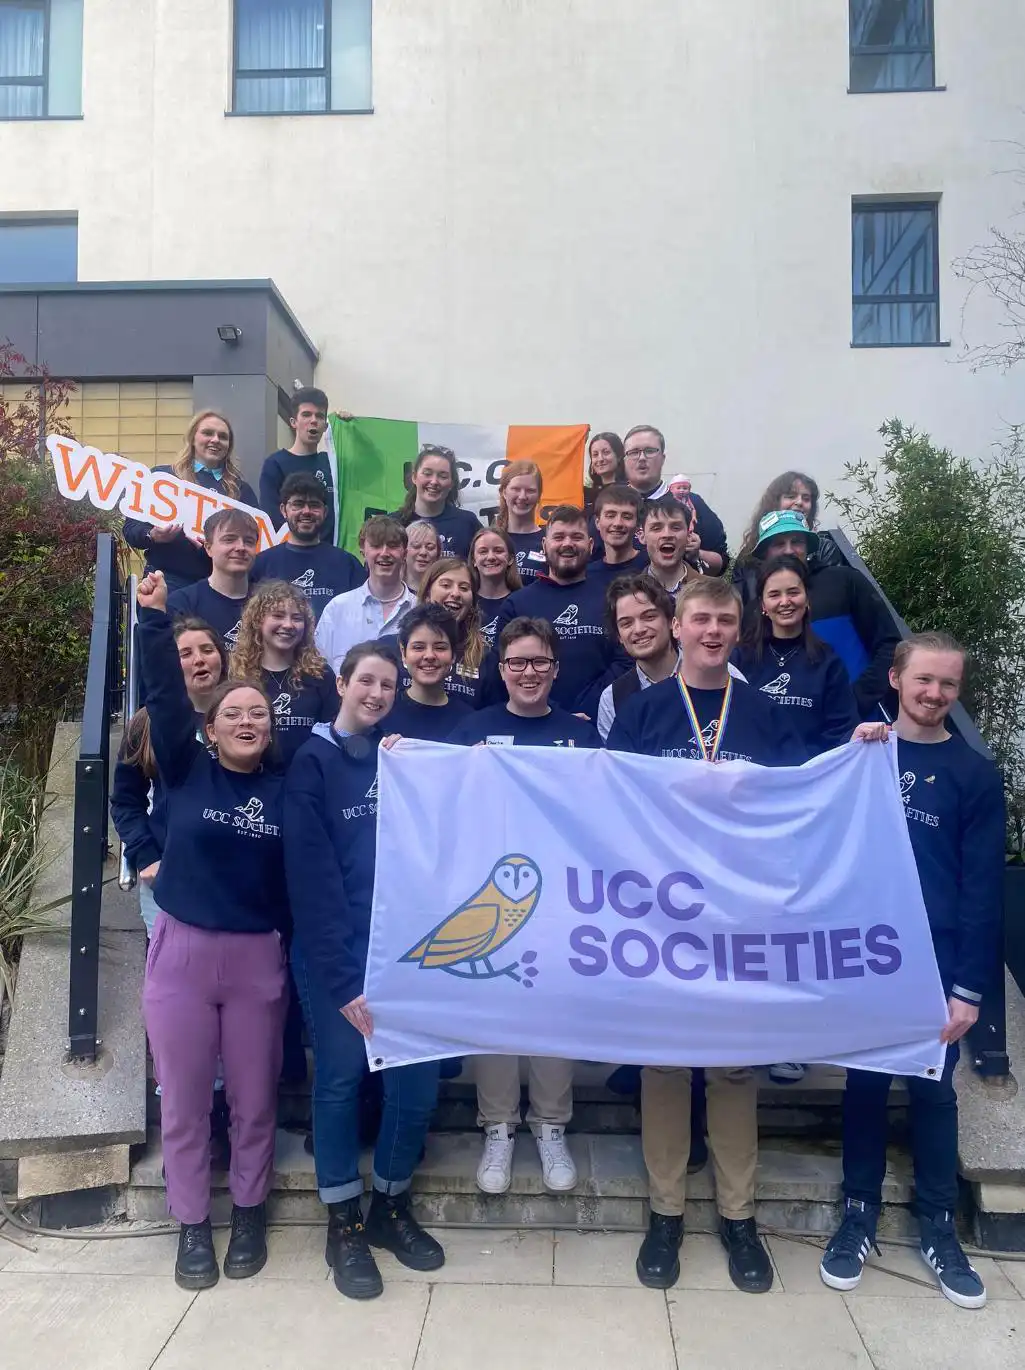 UCC society members hold the UCC Societies flag at BICS 2023 event